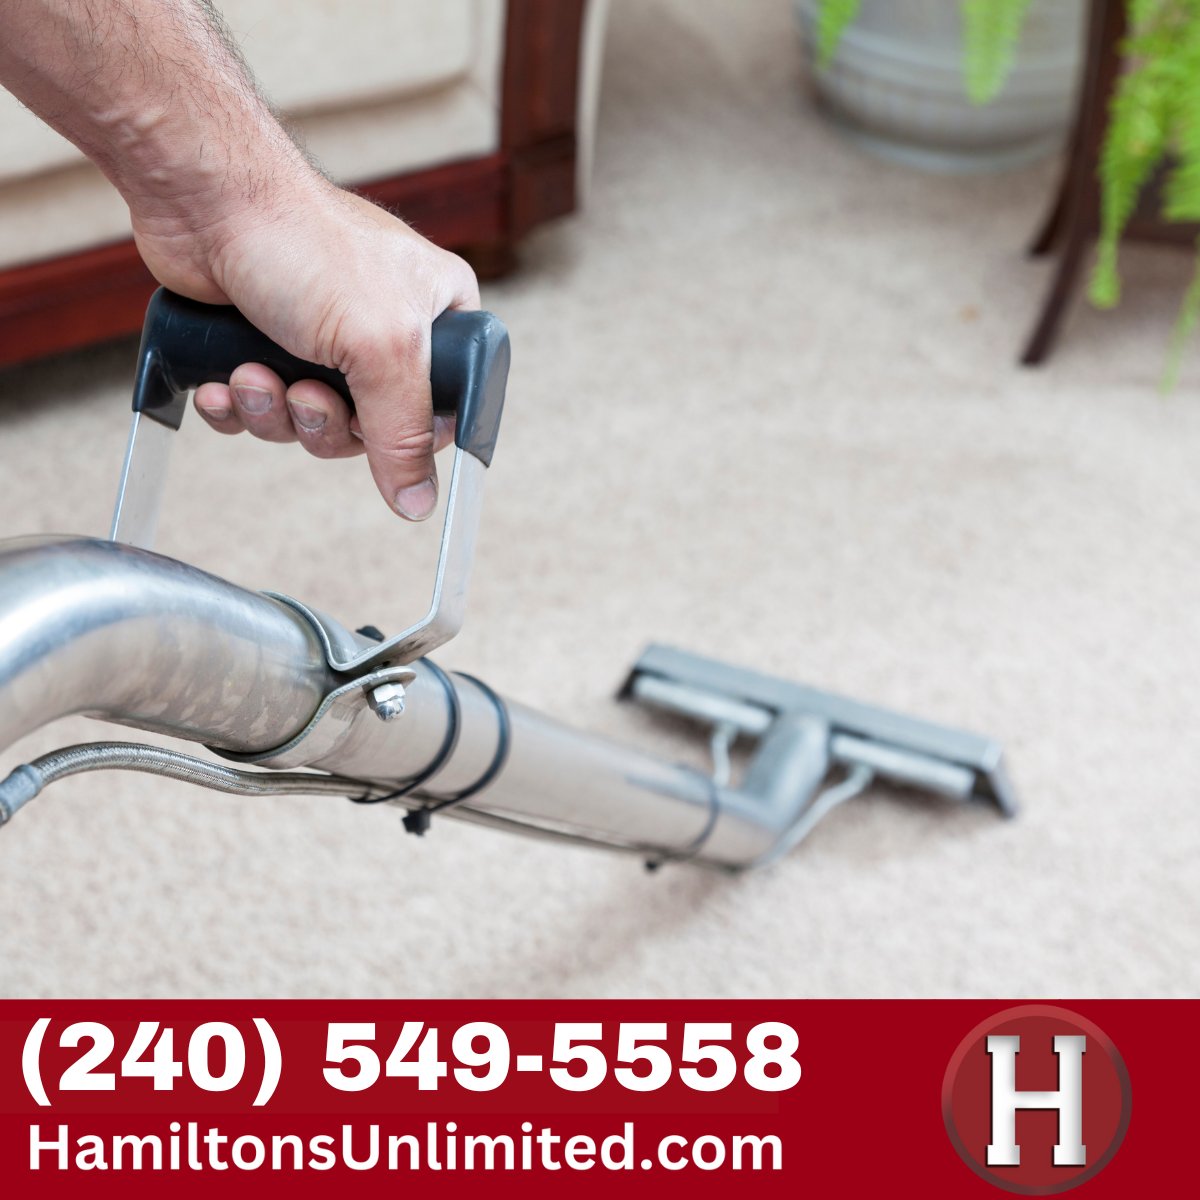 Don't let dirty carpets ruin your home's appearance. Hamilton's Unlimited provides expert carpet cleaning in Frederick County, MD to restore your floors to their former glory. #carpetcleaning #expertcarpetcleaningcontractor #frederickcountymd